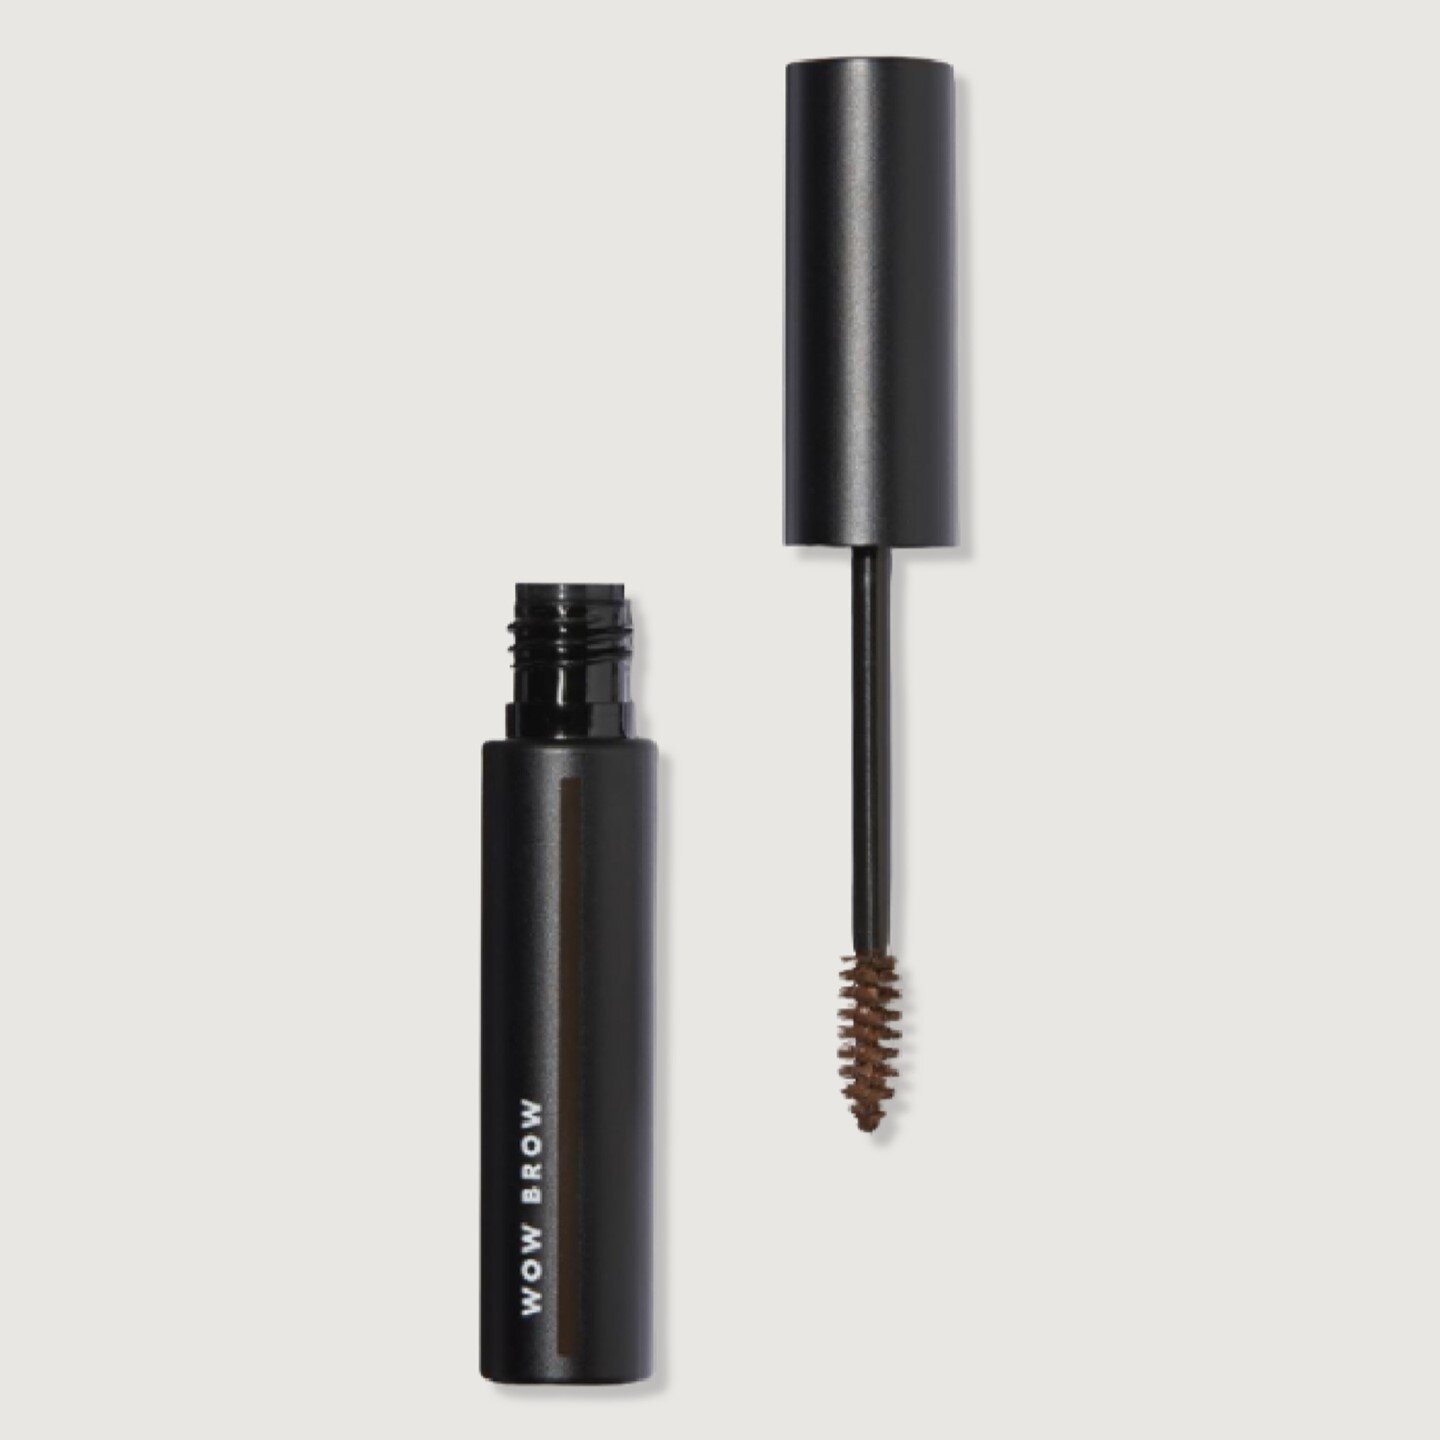 The Memorial Day Weekend sales have kicked off and there are SO. MANY. GOOD. ONES! Including 25% off E.L.F. Cosmetics, home of my favorite brow product. It's similar to Glossier Boy Brow but better and only $4 *before* the 25% off.⁠
And I've rounded 